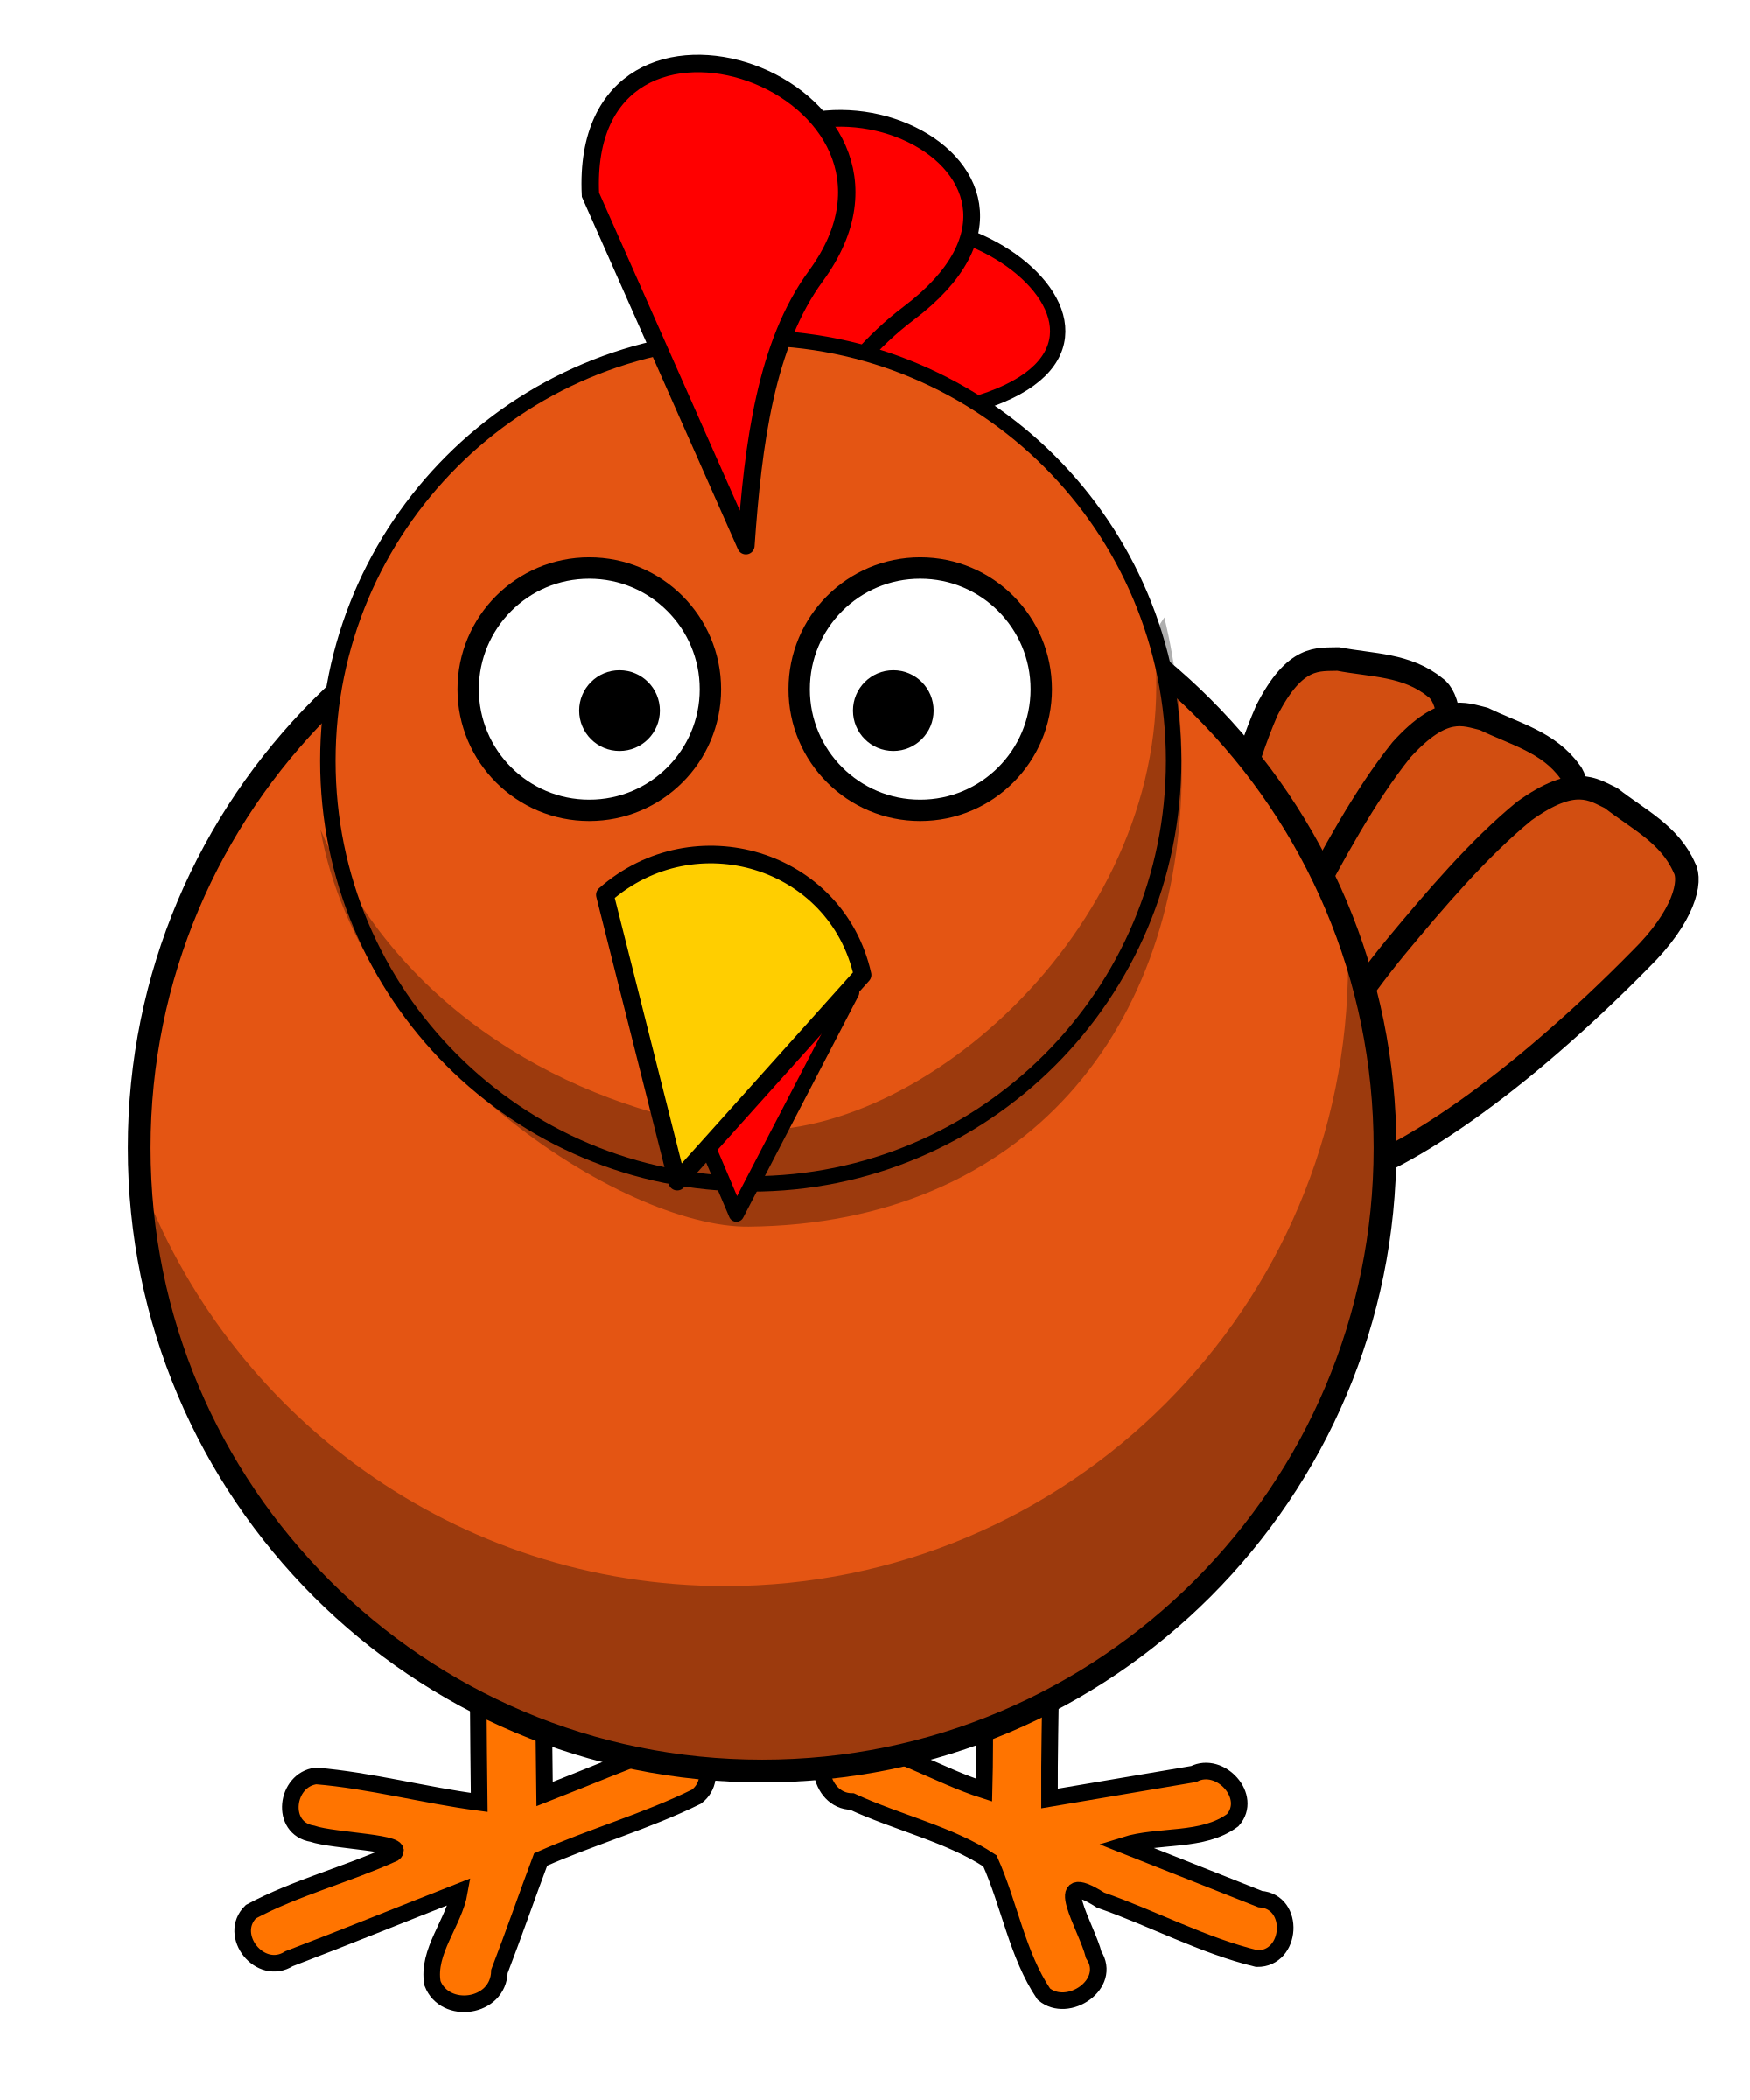 clip art chicken and egg - photo #20